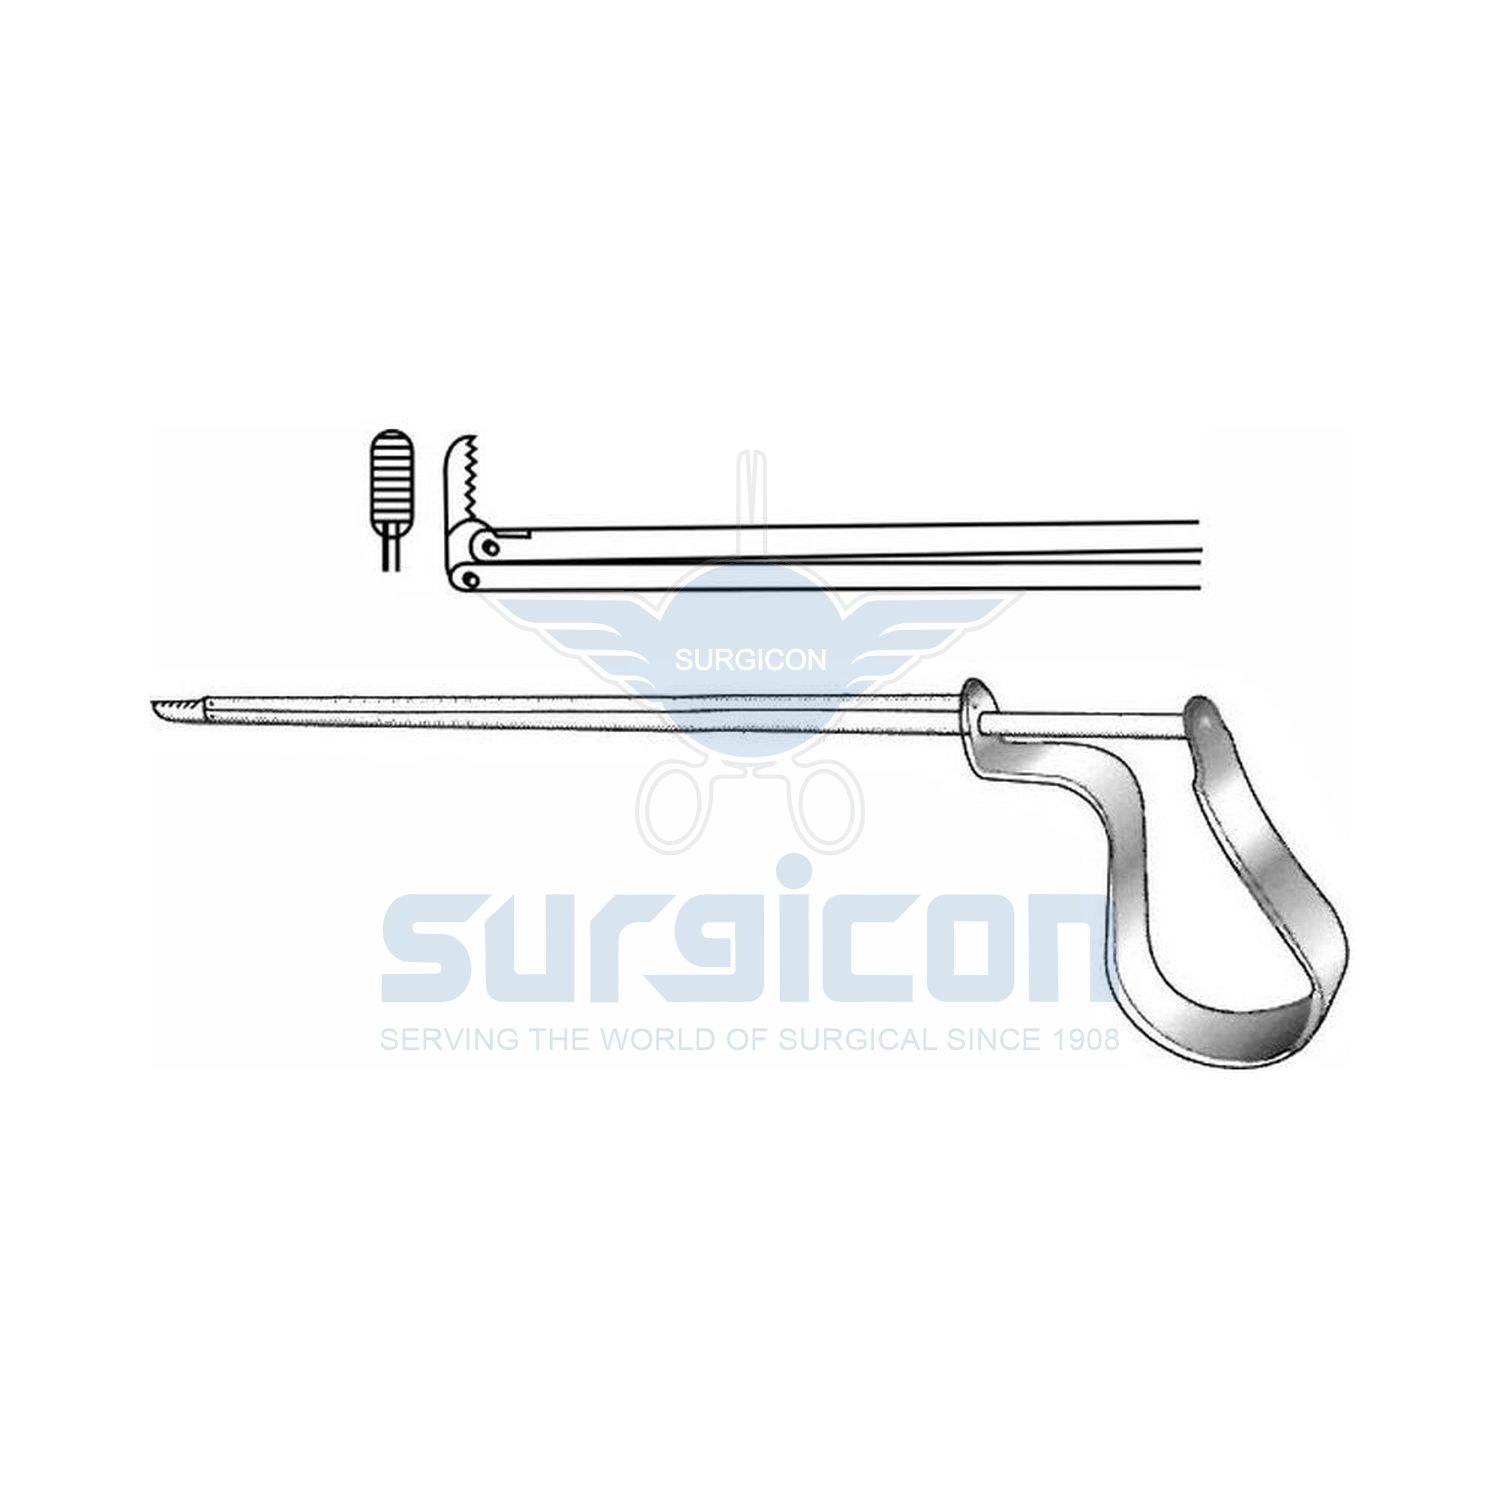 Quire-Ear-Polypus-Snare-Forcep-J-31-1160